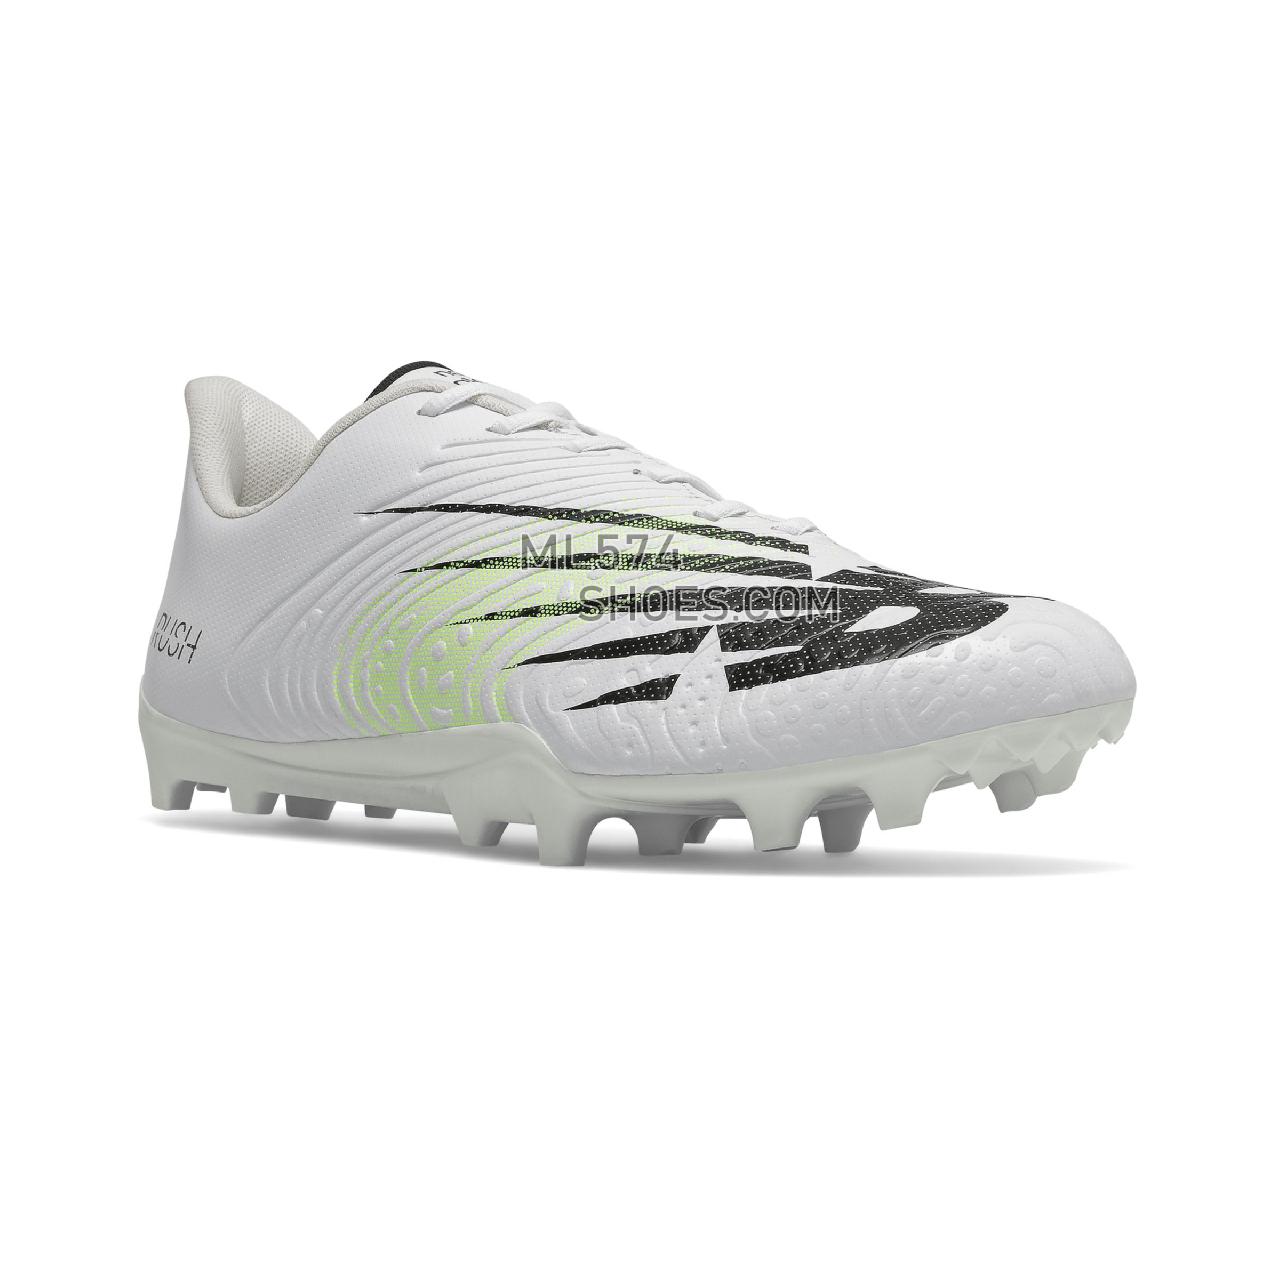 New Balance RushV3 Low - Men's Turf And Lacrosse Cleats - White with Silver - RUSHLW3